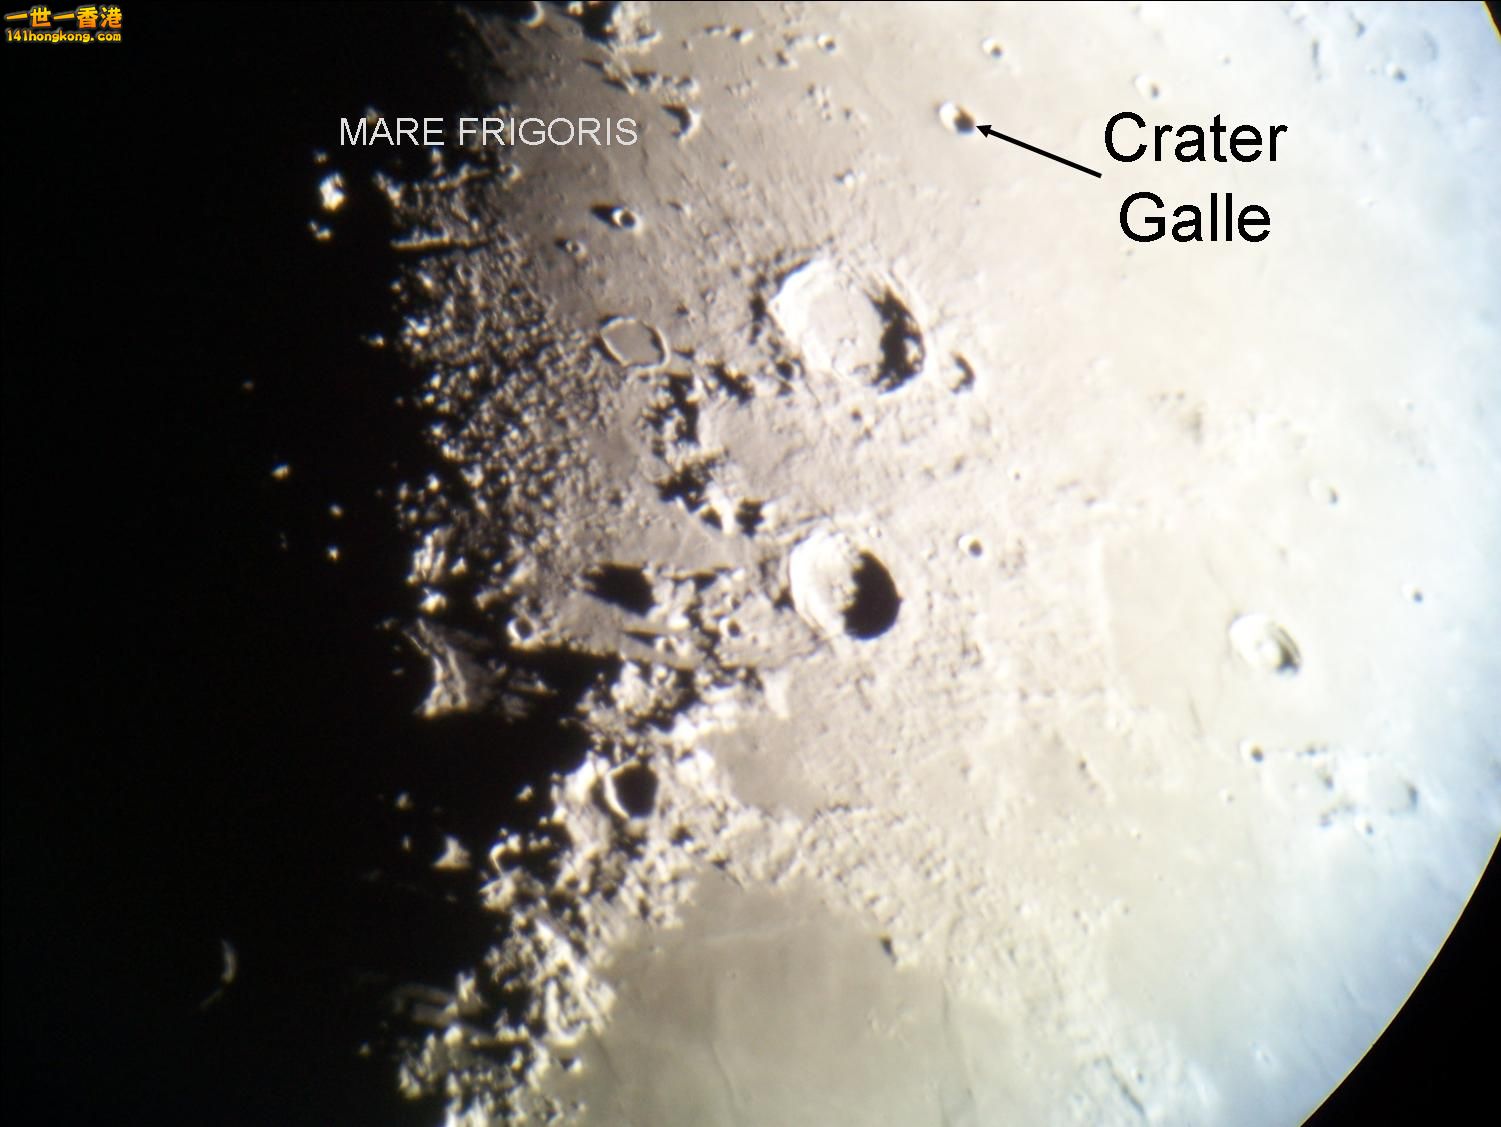 Crater_Galle_10-28-06.jpg